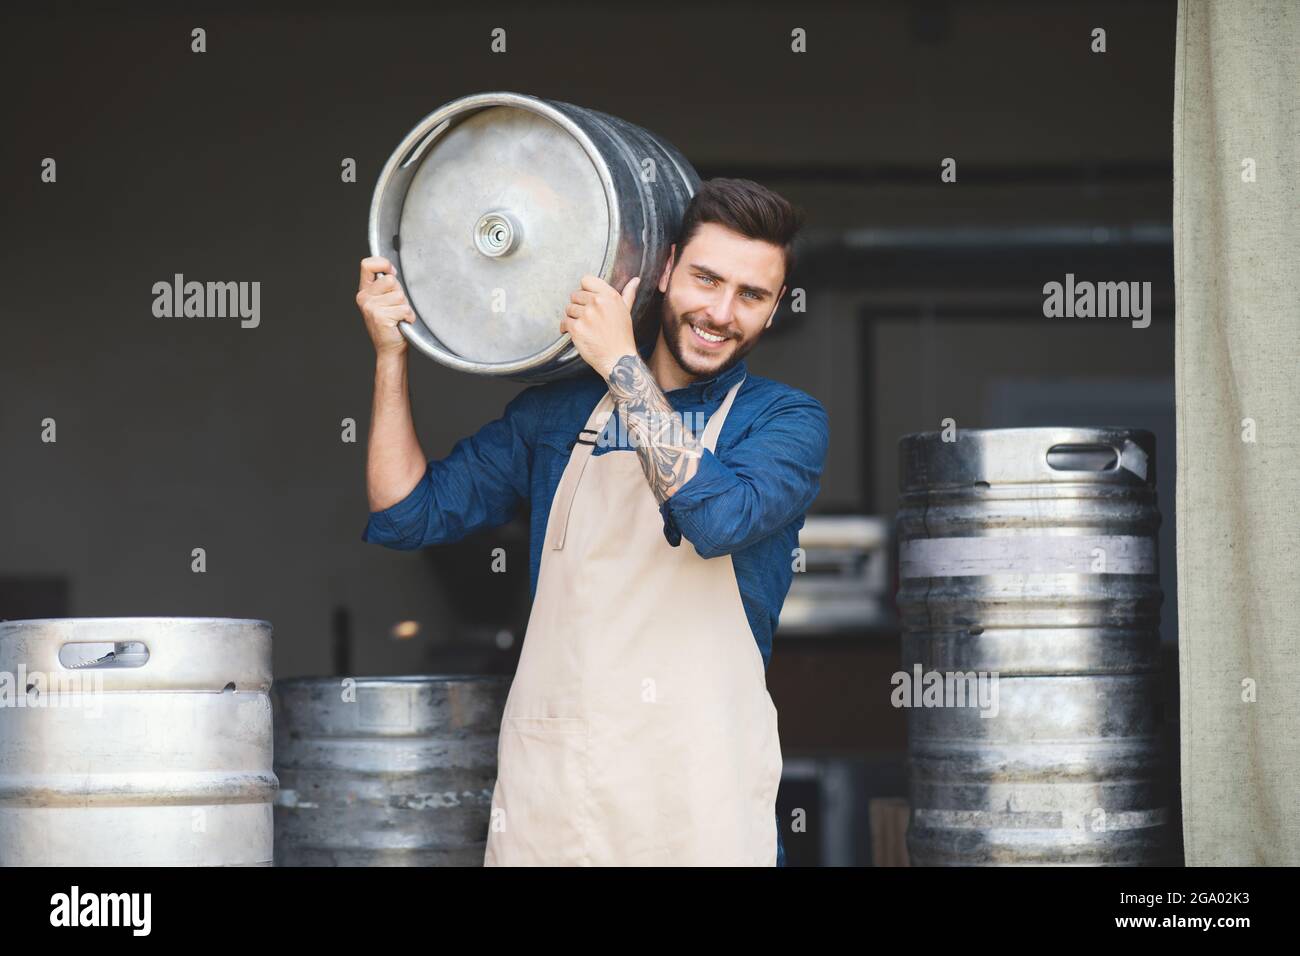 Strong warehouse worker, brewery owner working at plant, small business and success emotions Stock Photo